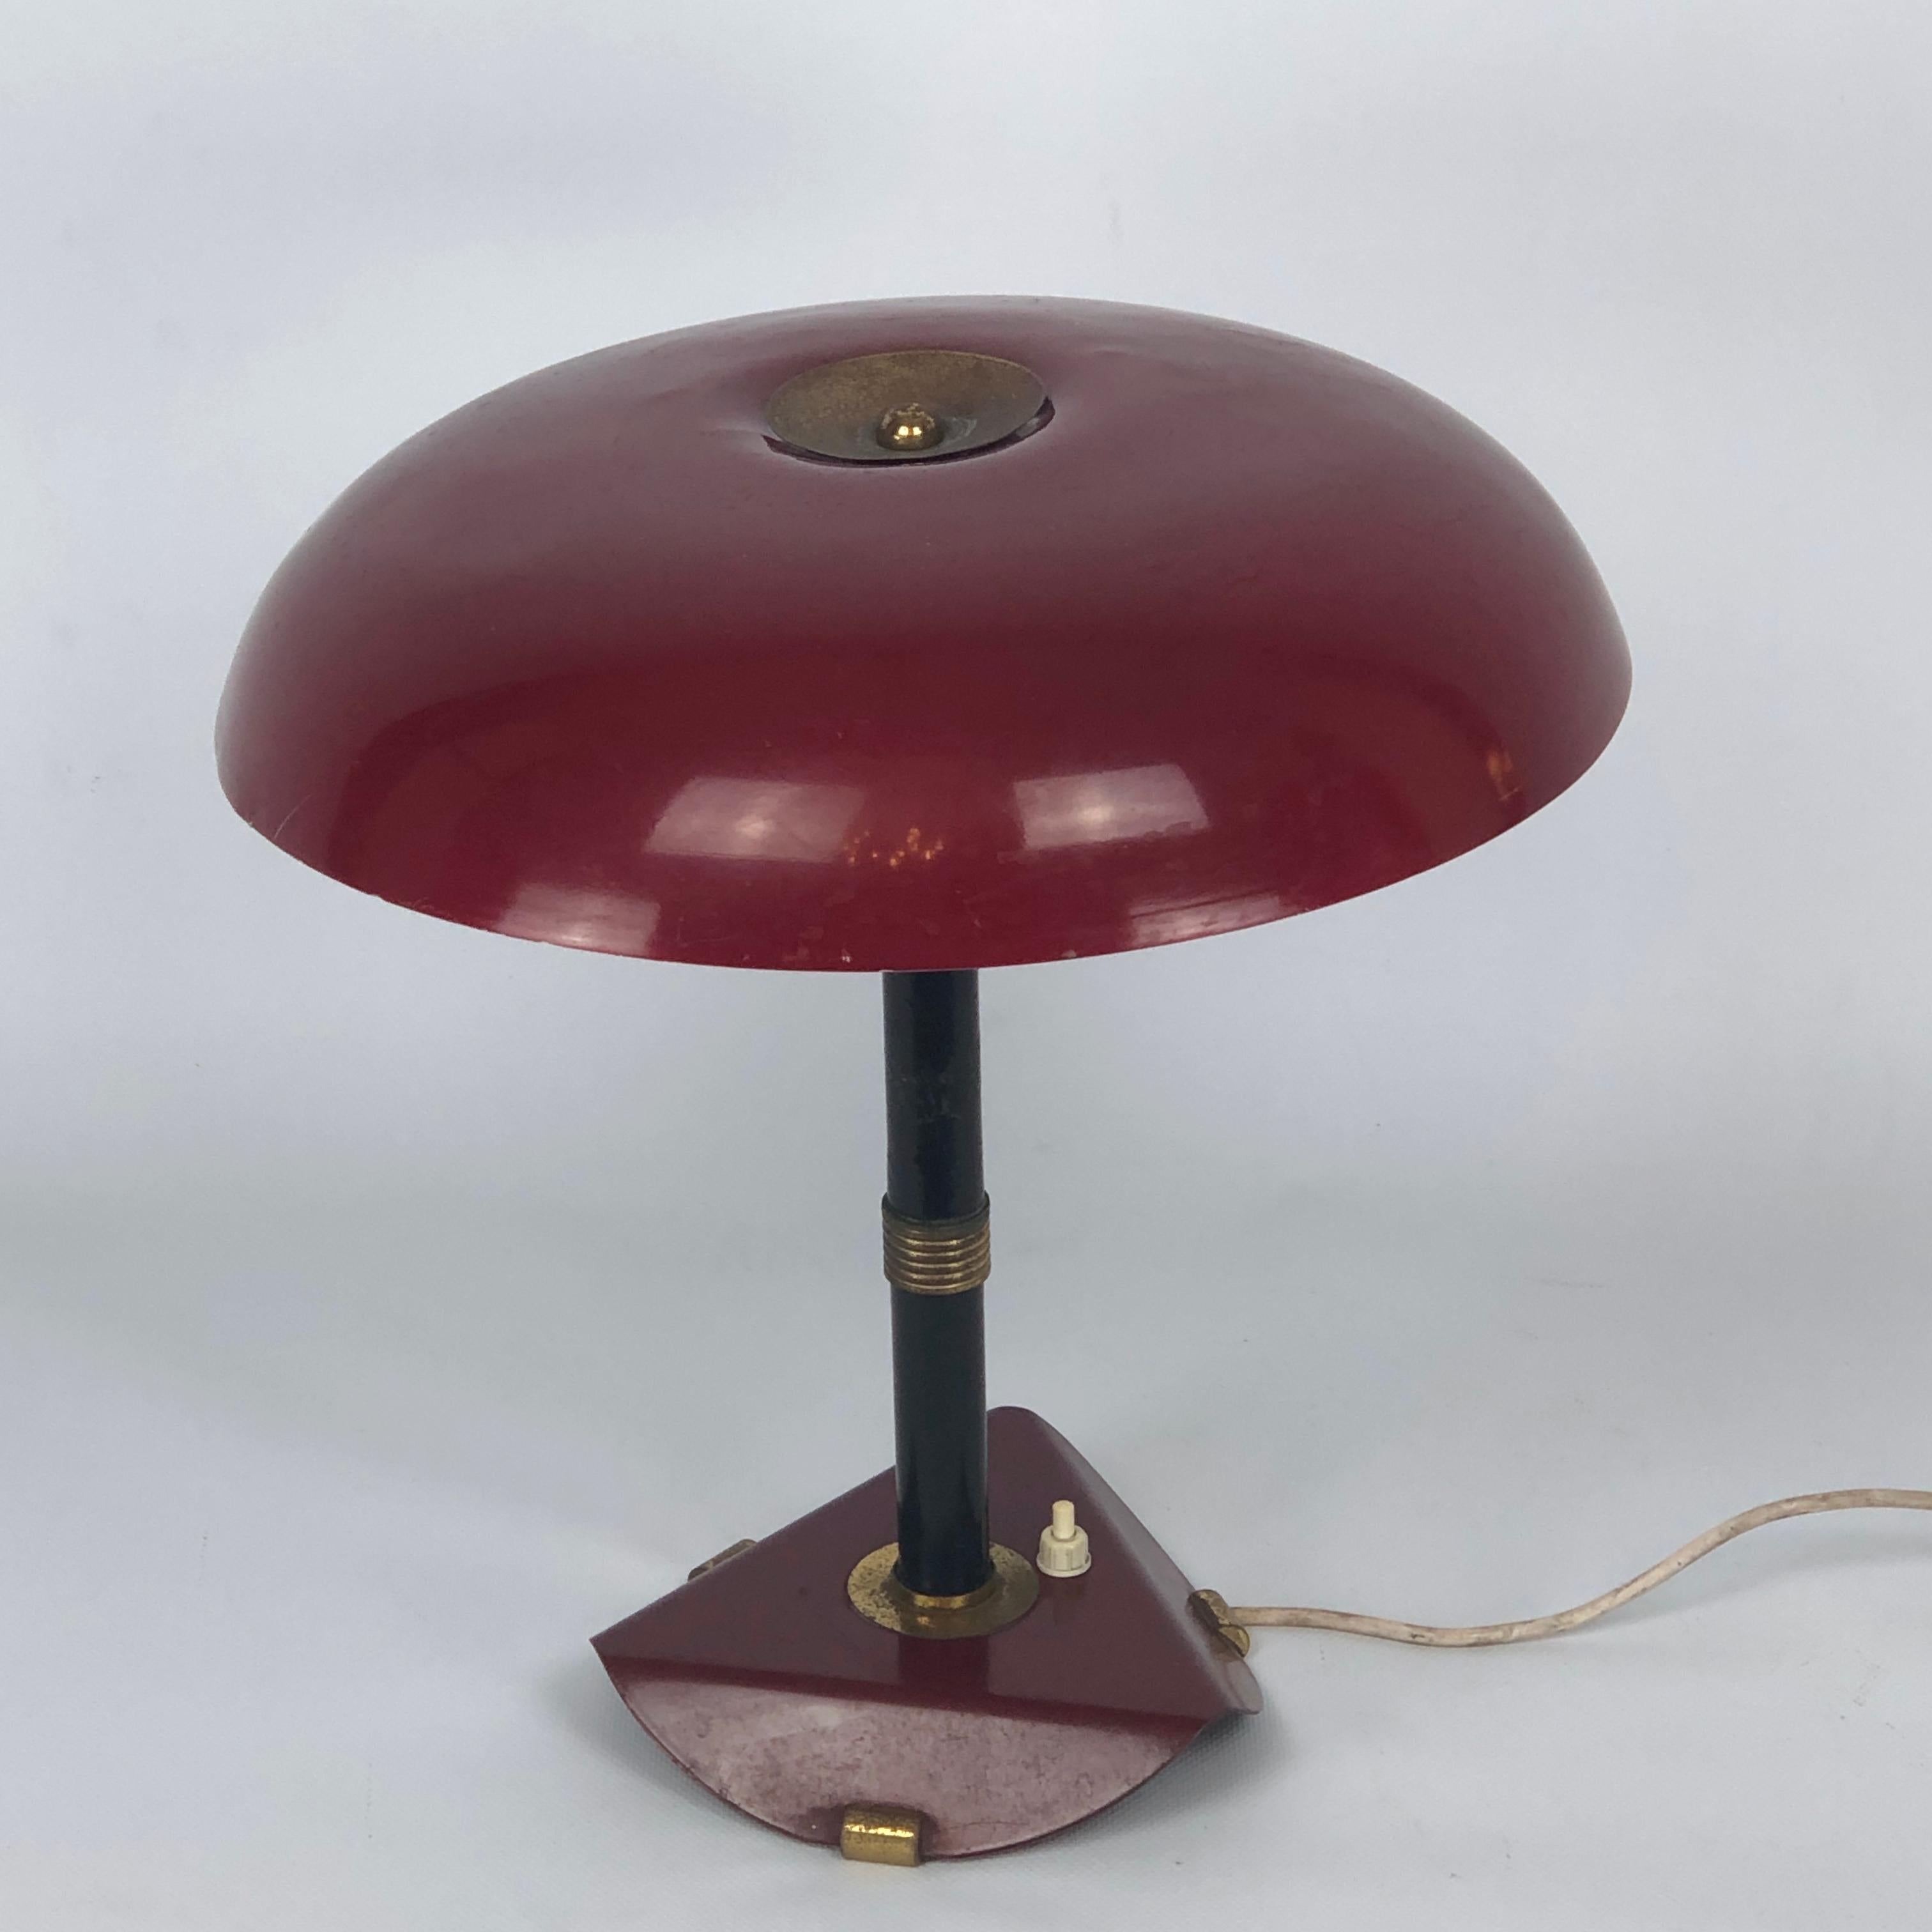 Original vintage condition with trace of age and use for this Italian desk lamp from 50s. Full working with EU standard, adaptable on demand for USA standard.
 